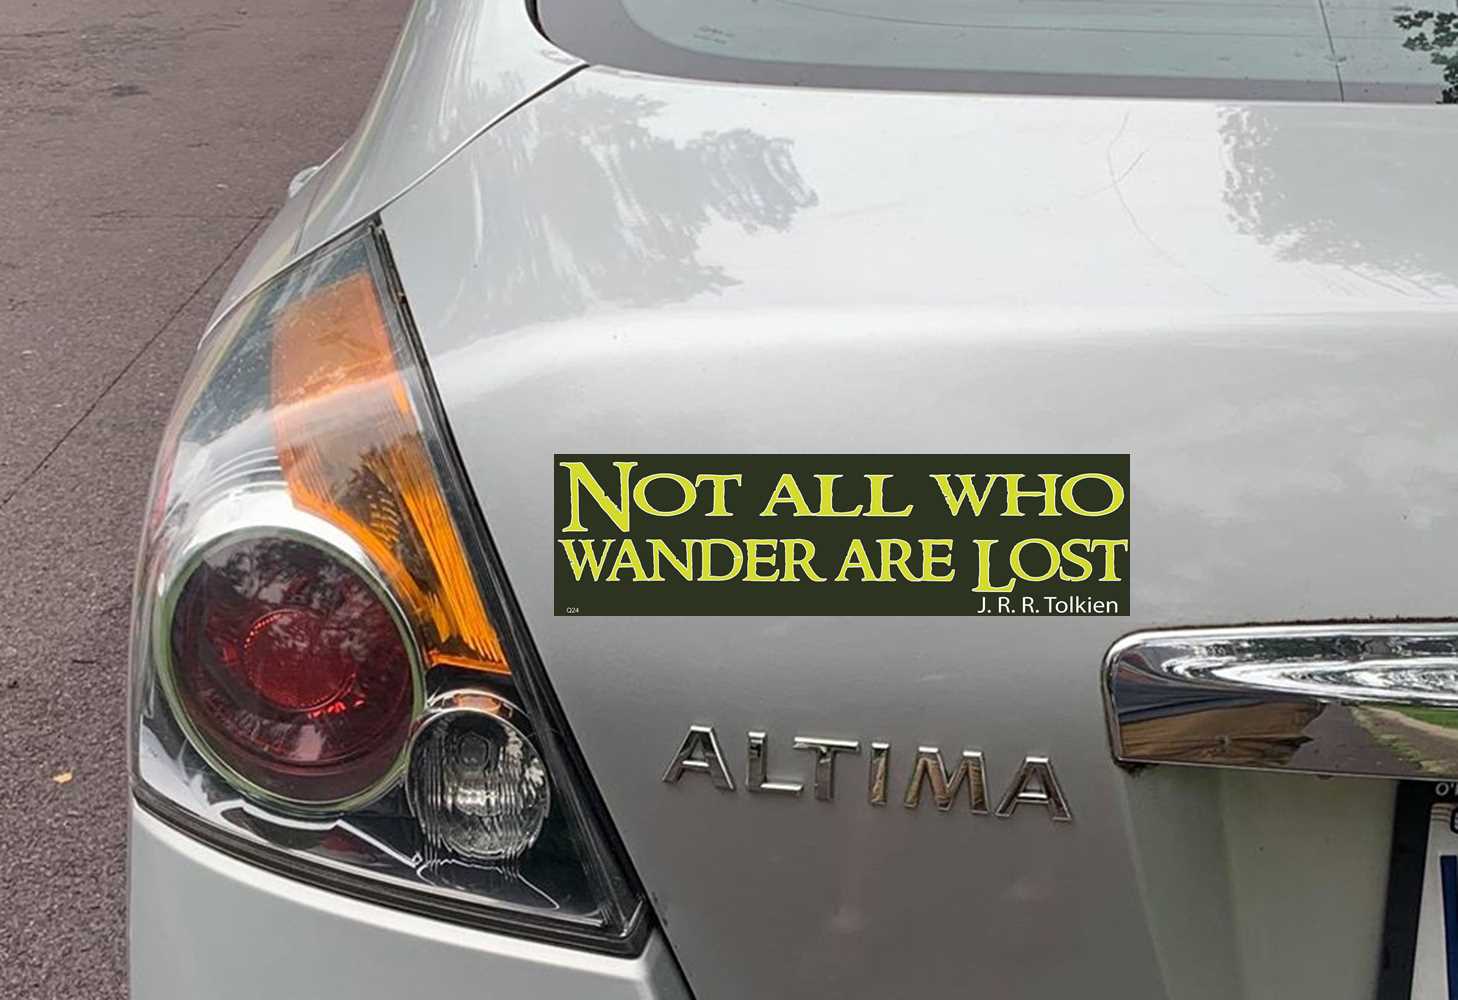 NOT ALL WHO WANDER ARE LOST - J.R.R. TOLKIEN  CAR MAGNET ON CAR